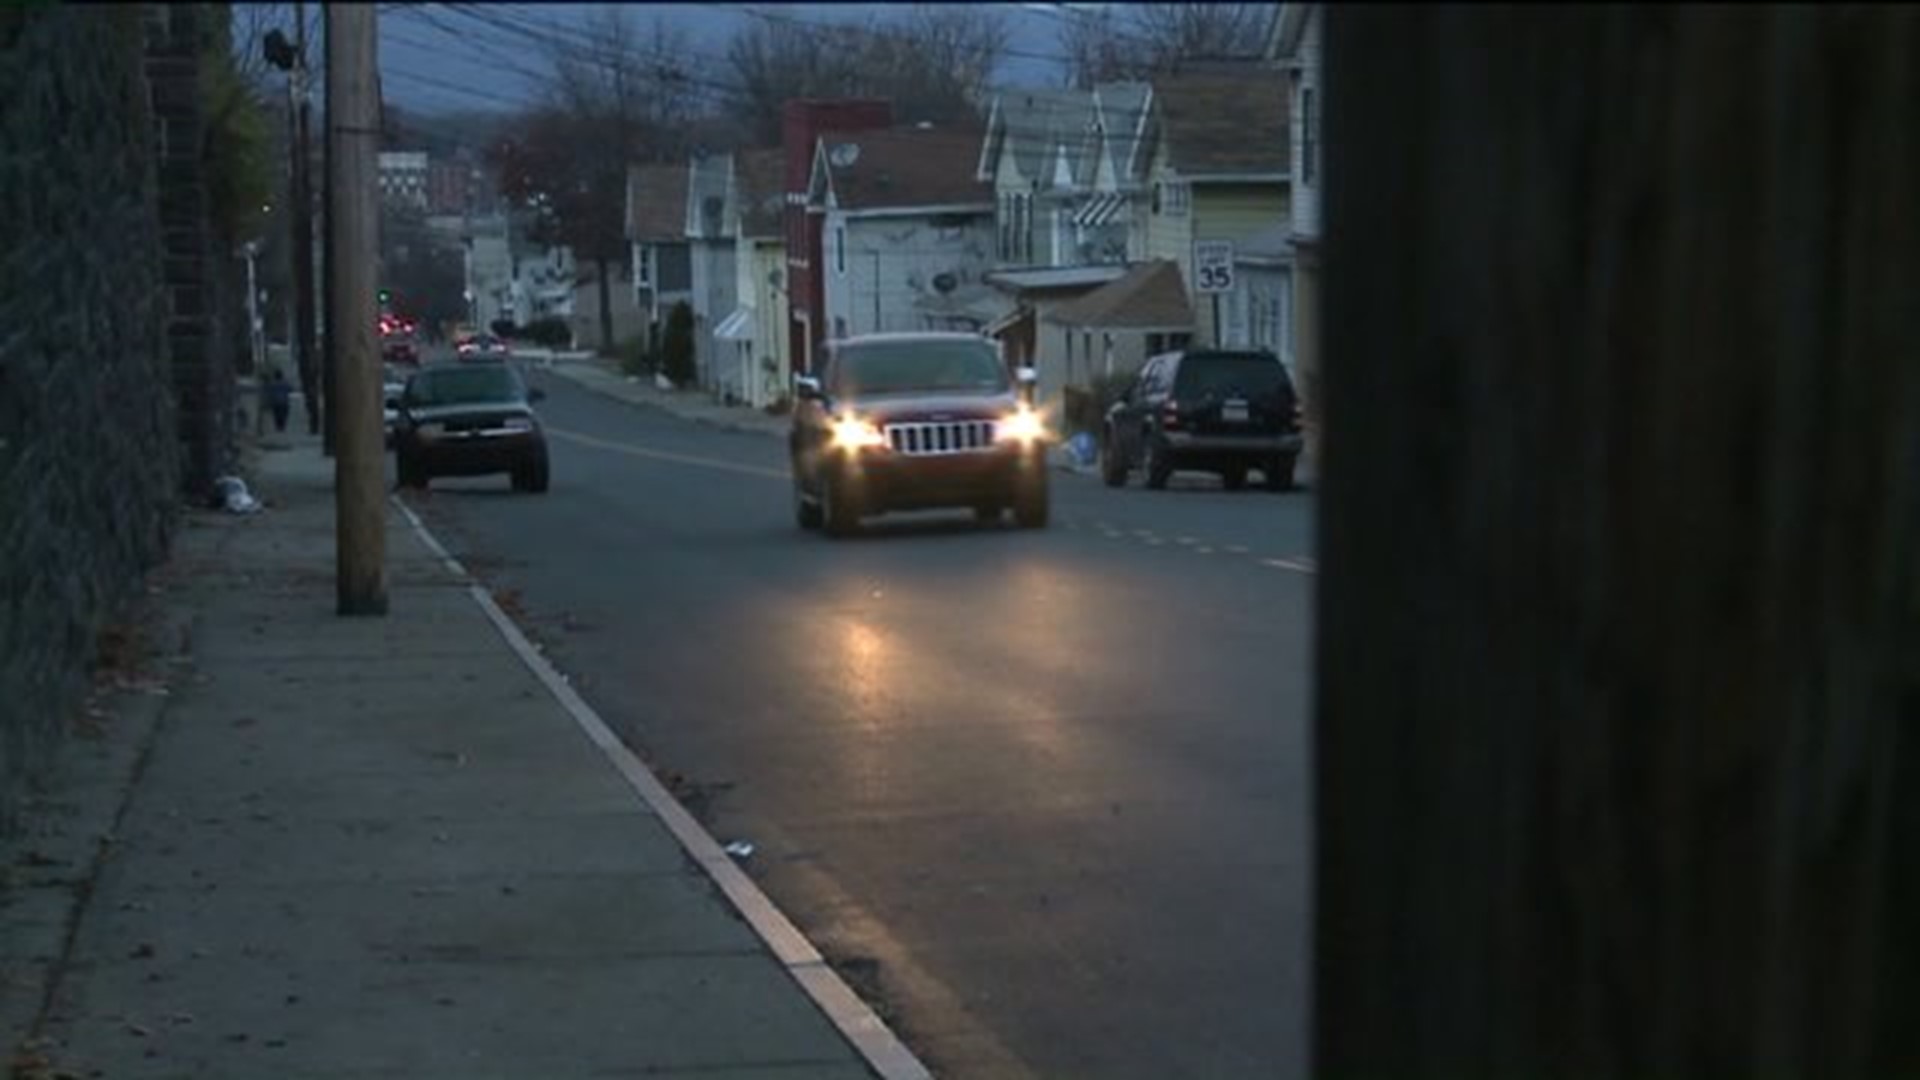 In Wilkes-Barre, Police Investigate After Children Are Left Alone